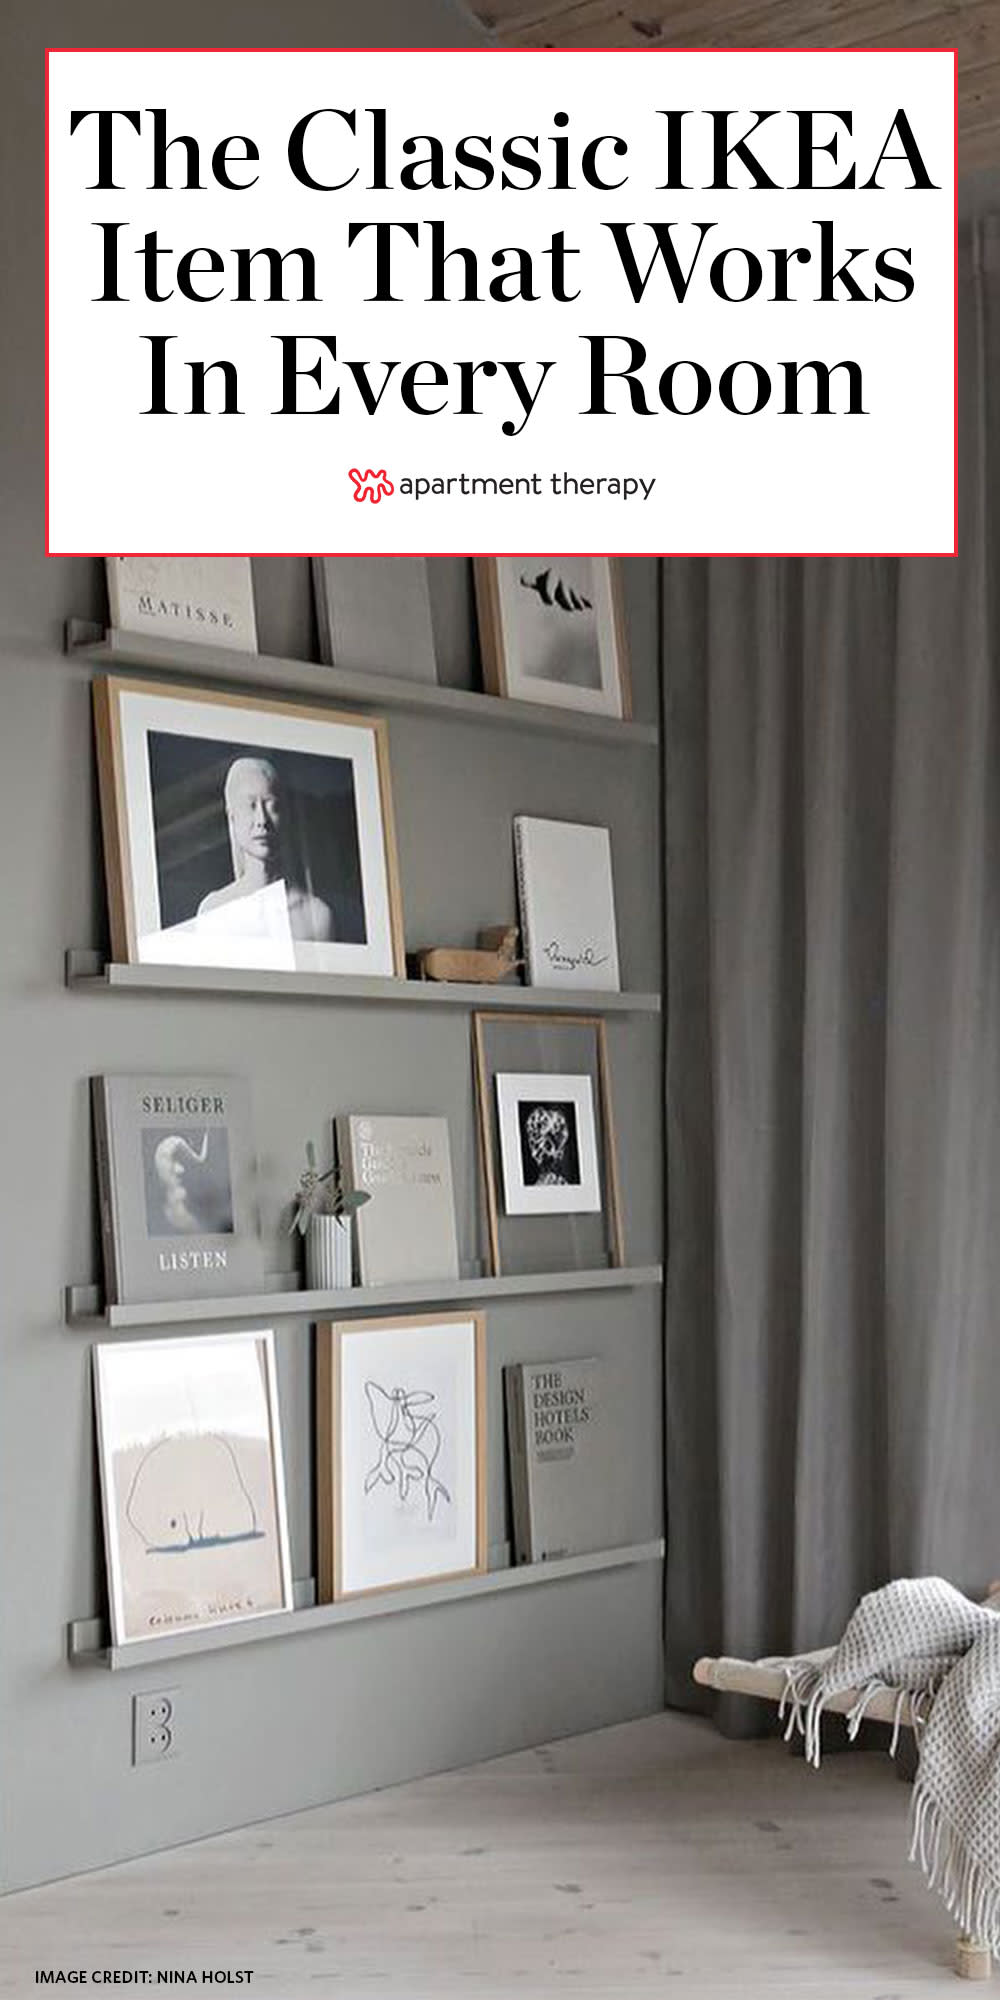 How To Decorate With Ikea S Floating Picture Shelves Apartment Therapy,Kitchen Helper Stool Ikea